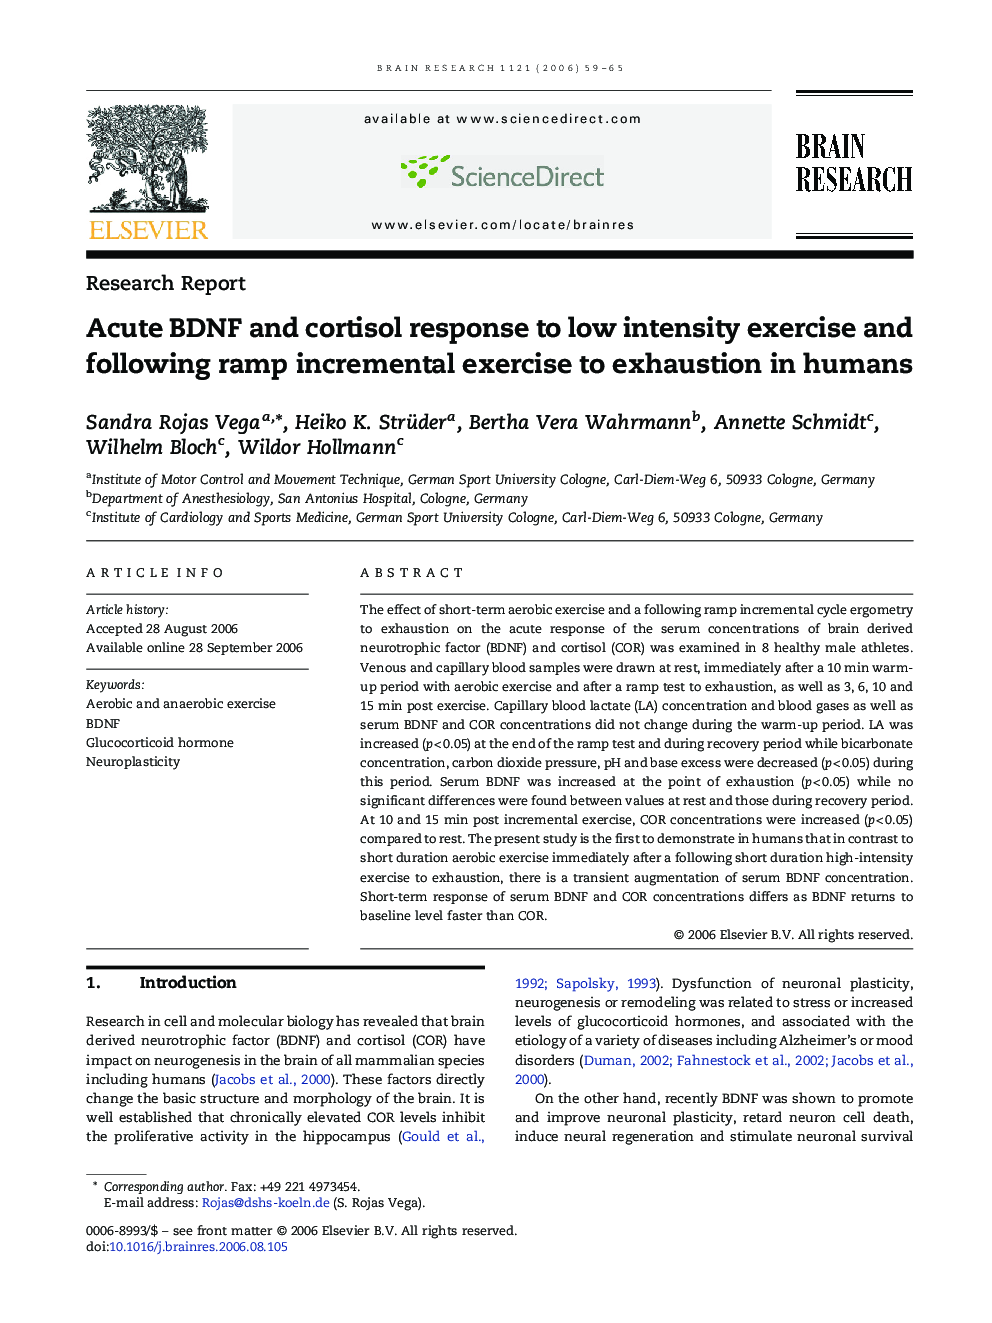 Acute BDNF and cortisol response to low intensity exercise and following ramp incremental exercise to exhaustion in humans